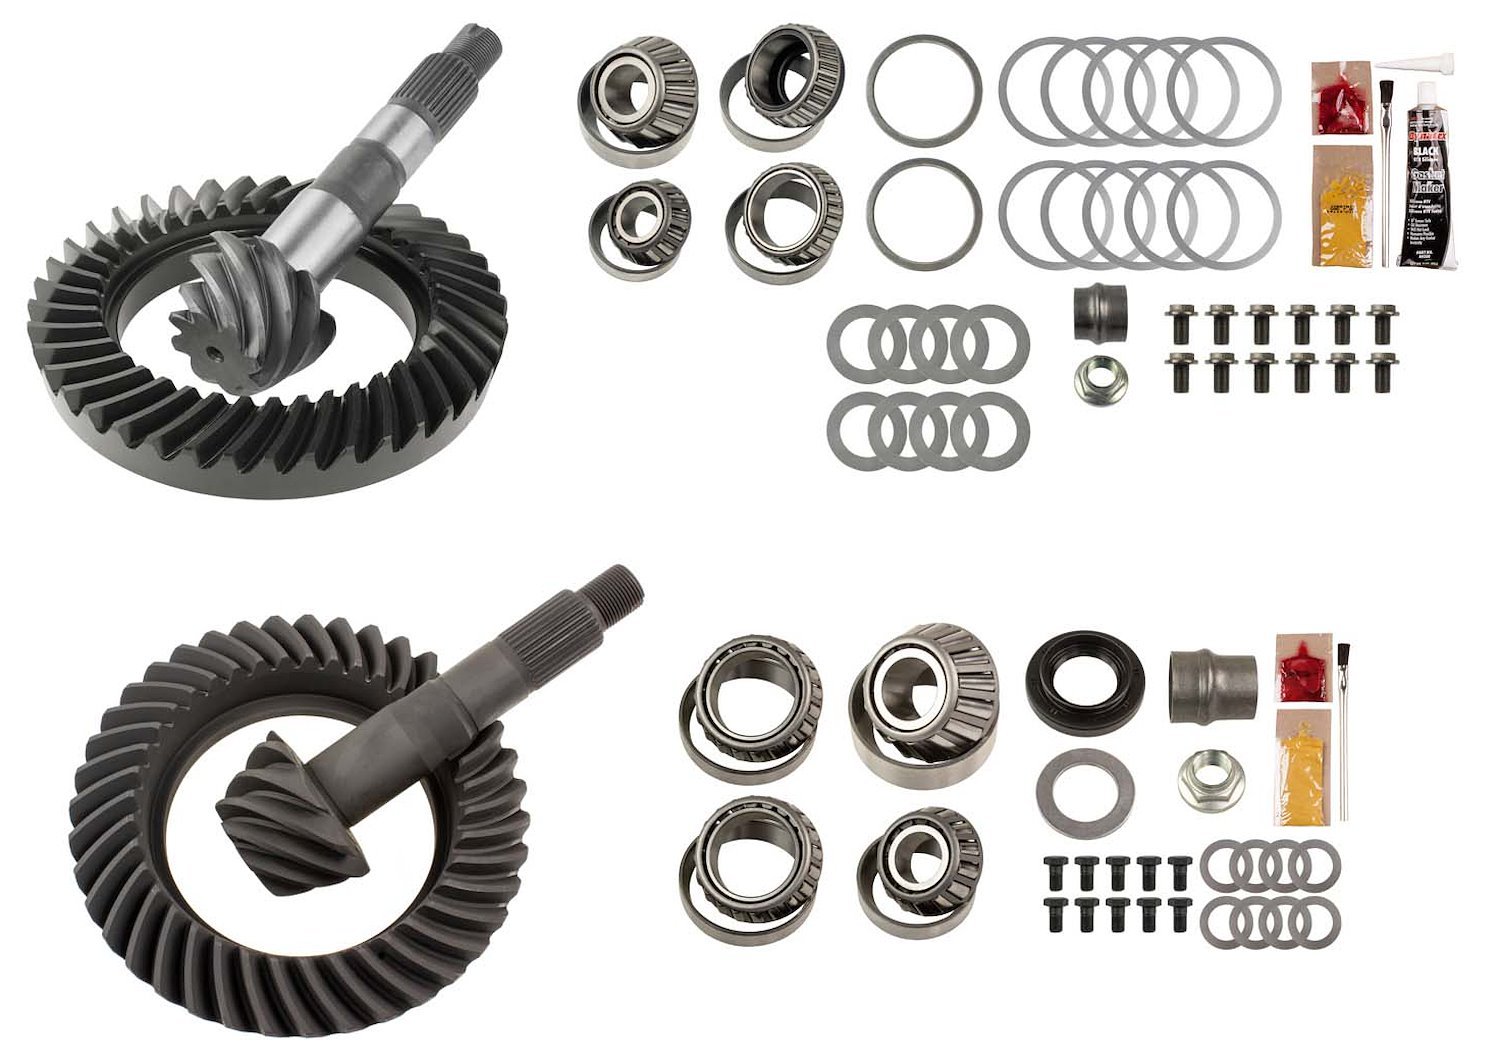 Complete Front and Rear Ring and Pinion Kit 2003-2009 Toyota 4Runner, 2007-2009 Toyota FJ Cruiser - 4.88 Ratio